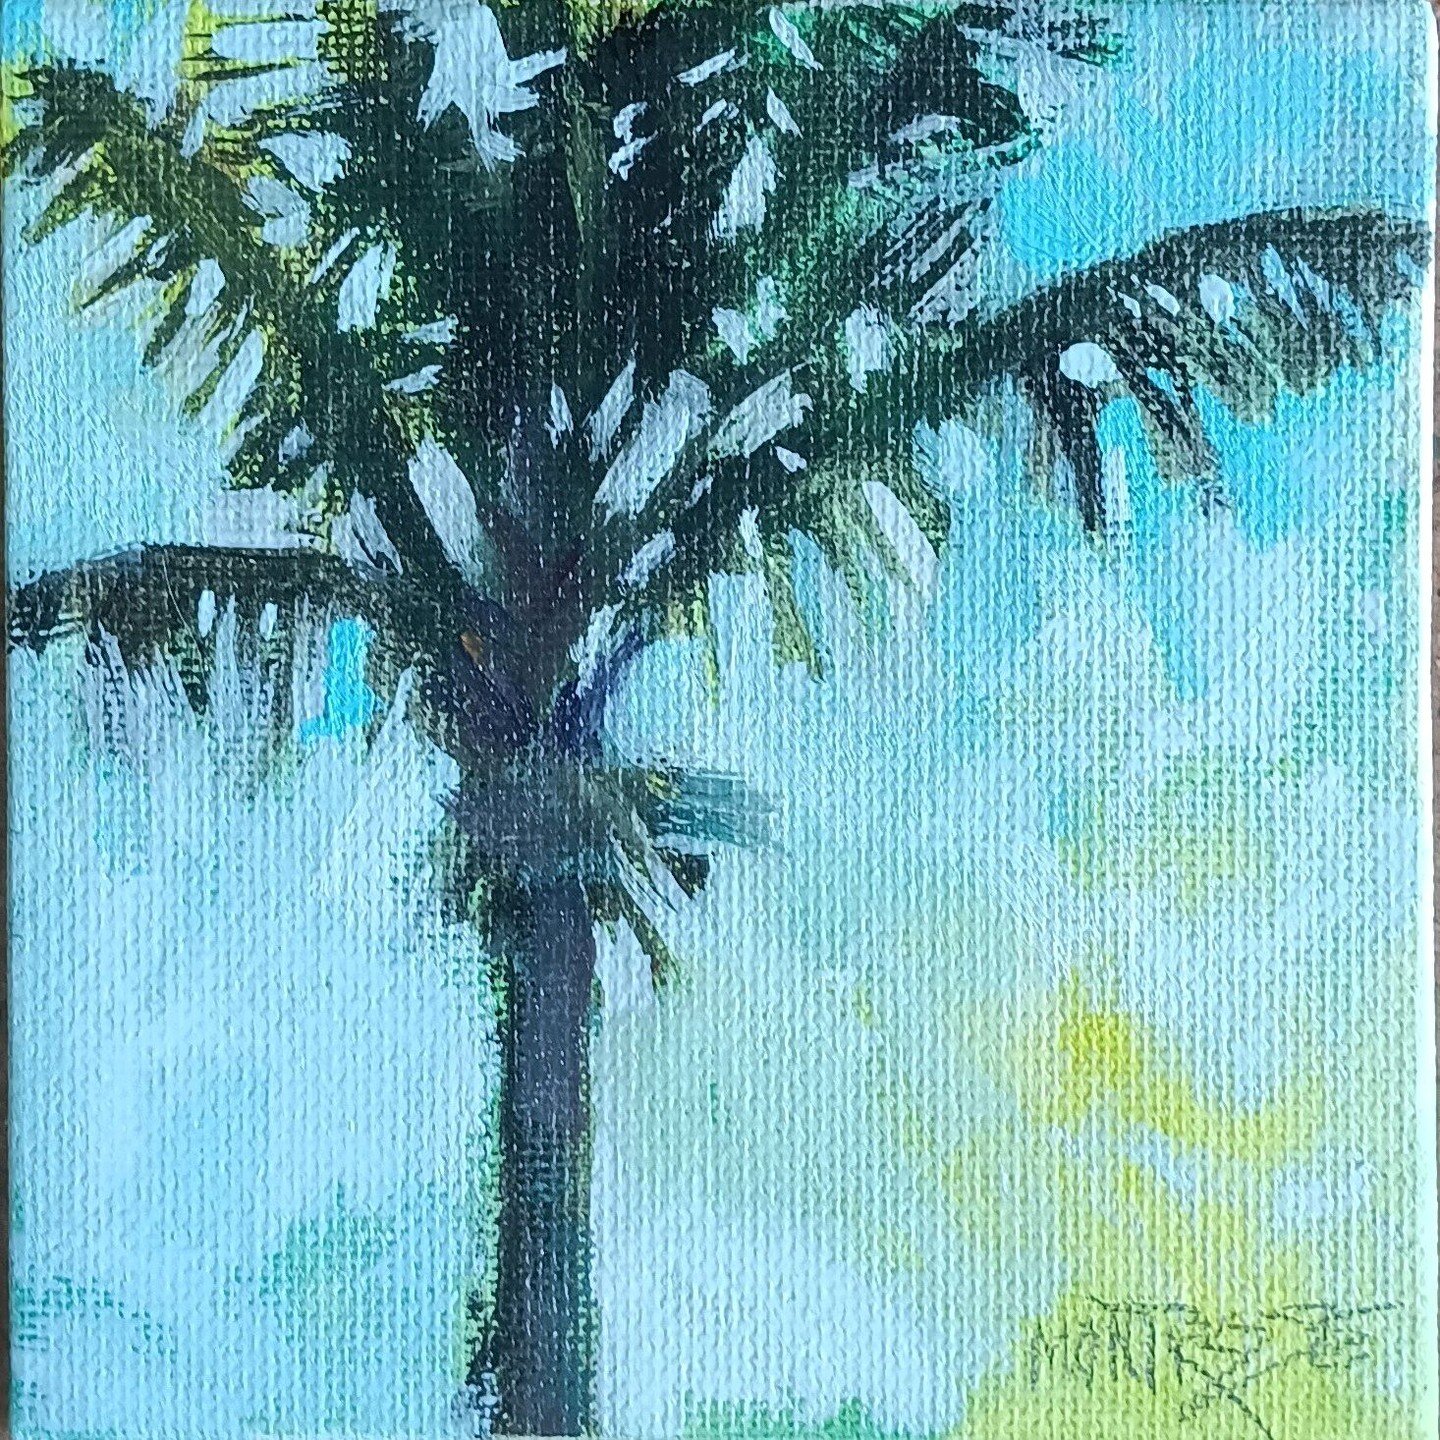 12/100
Another Hawaii palm tree! I had a bright green under painting on this and I couldn't resist letting some of that show. 
.
.
.
@dothe100dayproject 
#oilpaintingteacher #Sandiegoartist #artclass #oilpaintingclass #sandiegoartclass #youngartist #